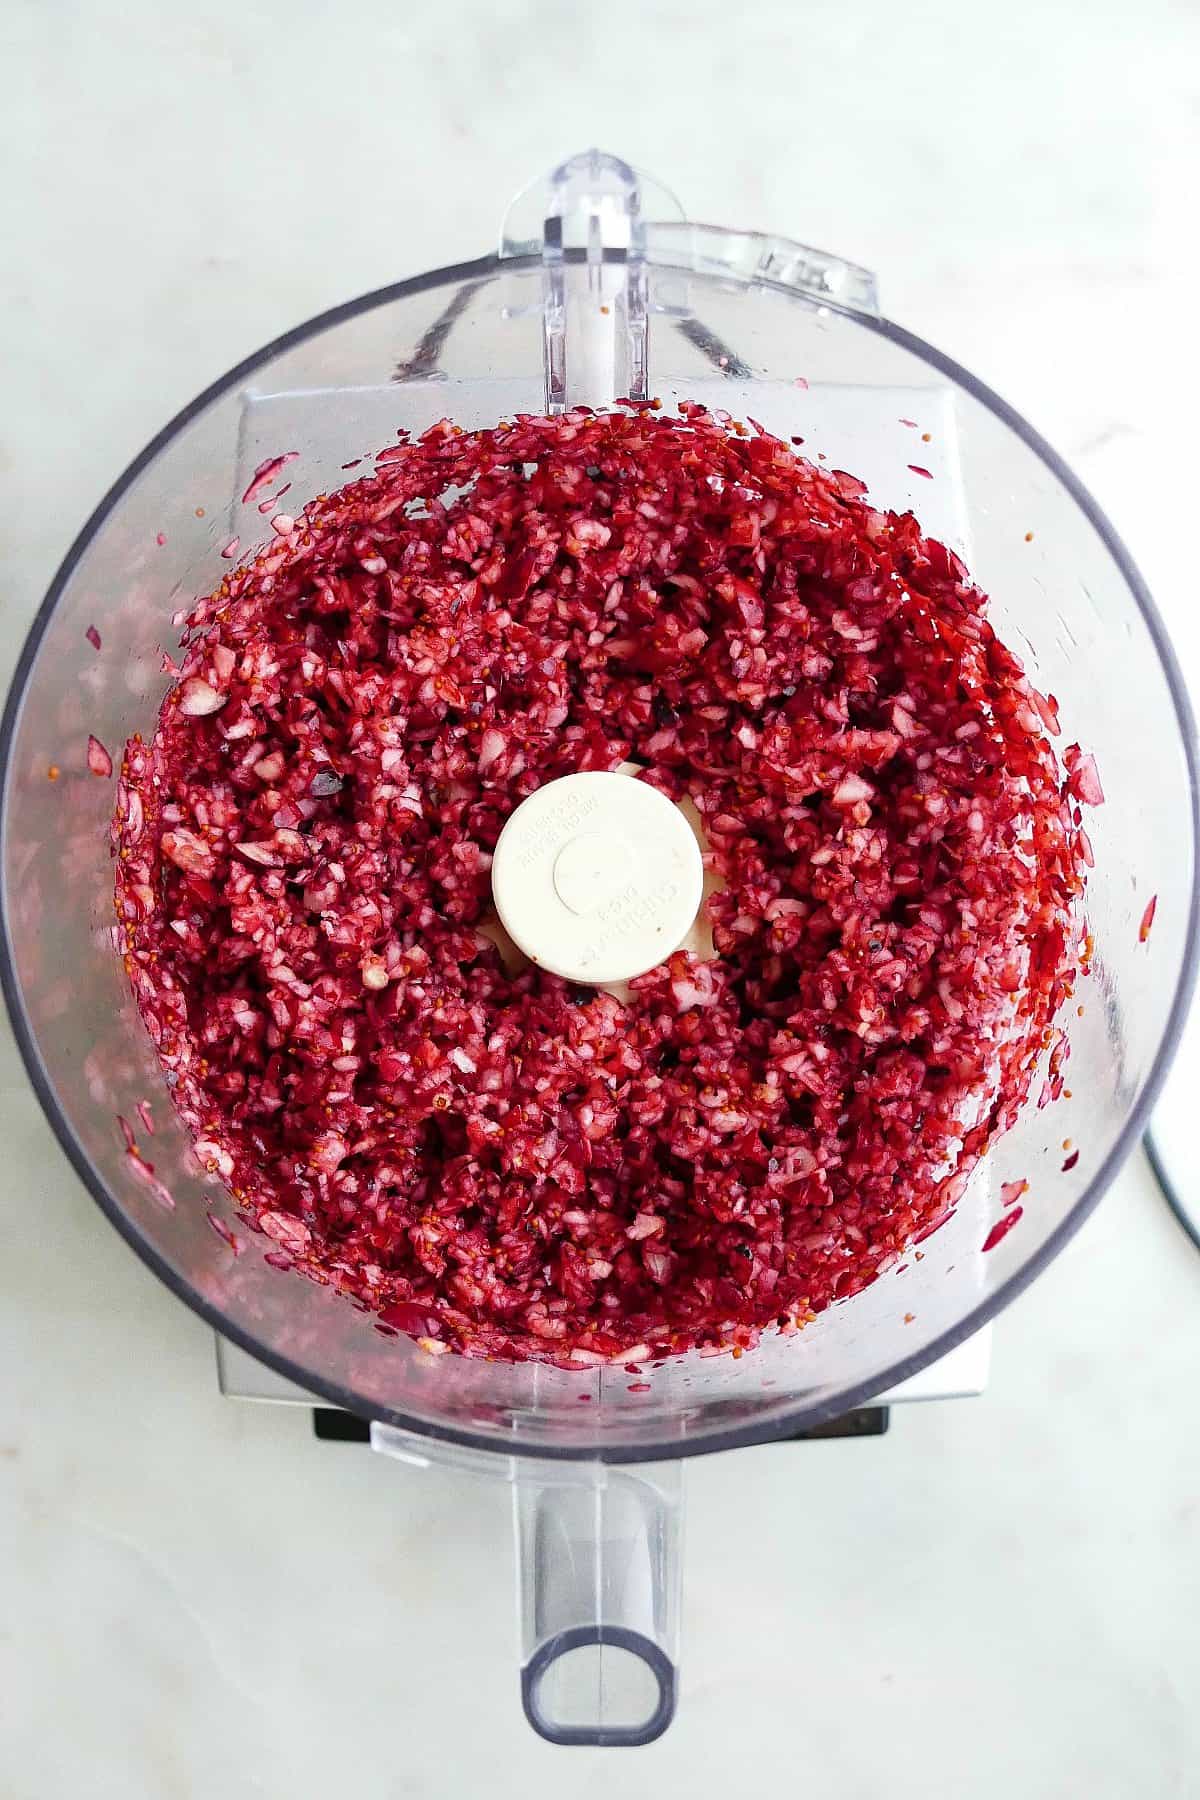 chopped cranberries in an open bowl of a food processor on a counter